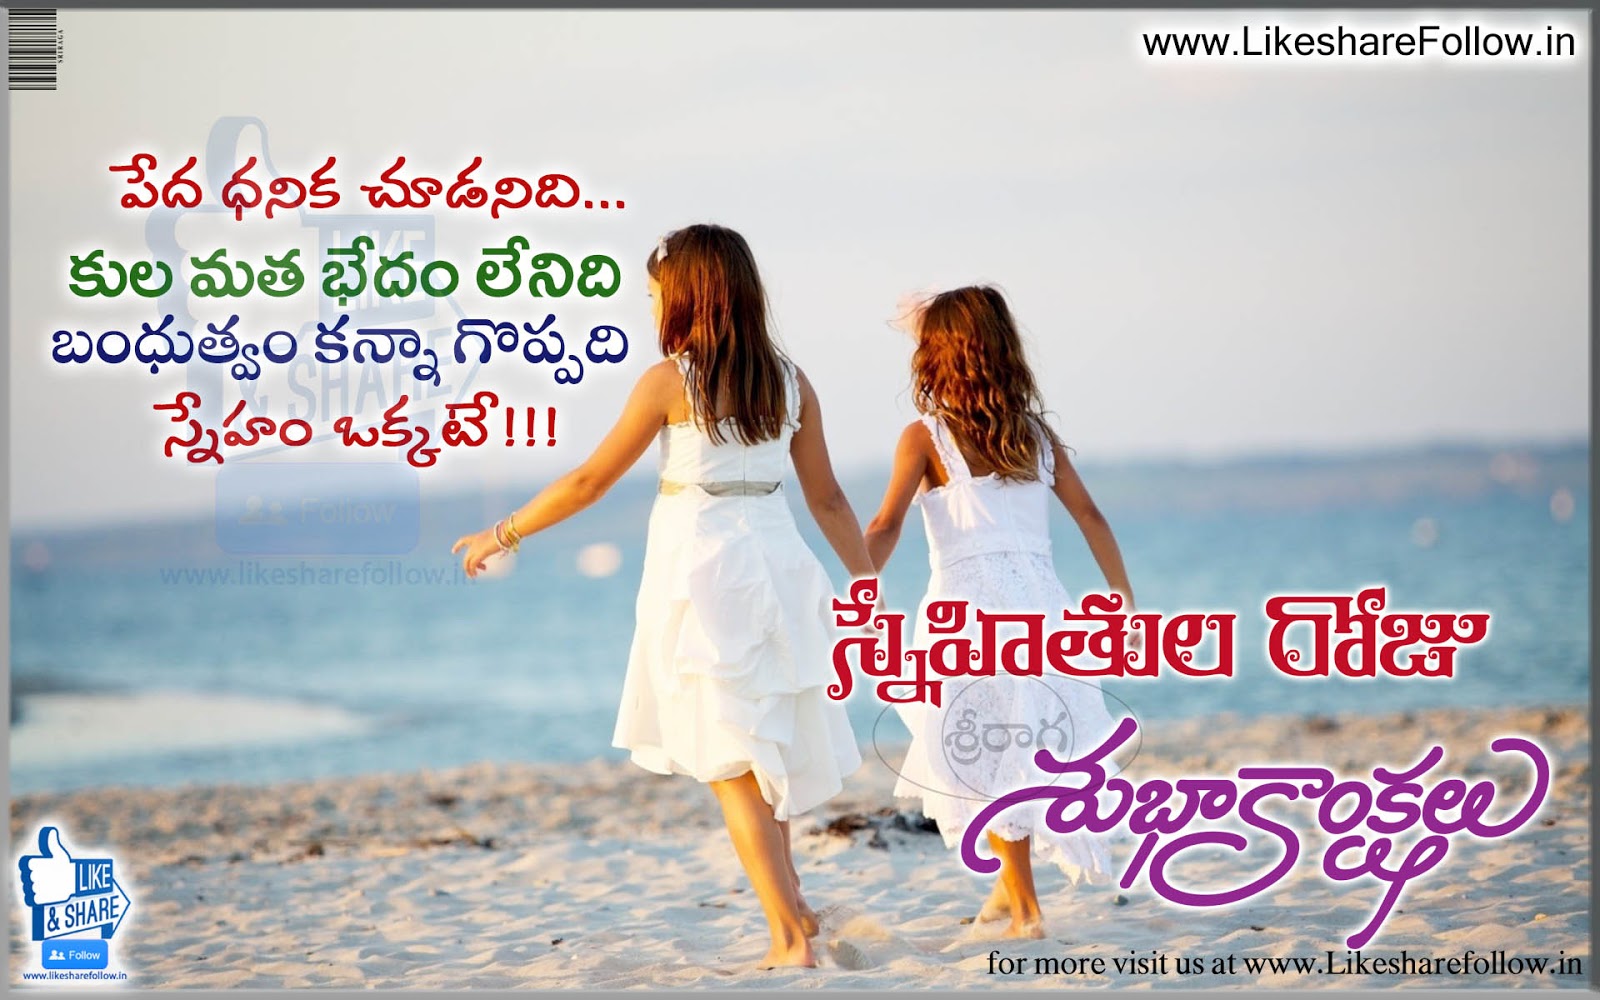 Happy Friendship Day Telugu wishes quotes | Like Share Follow